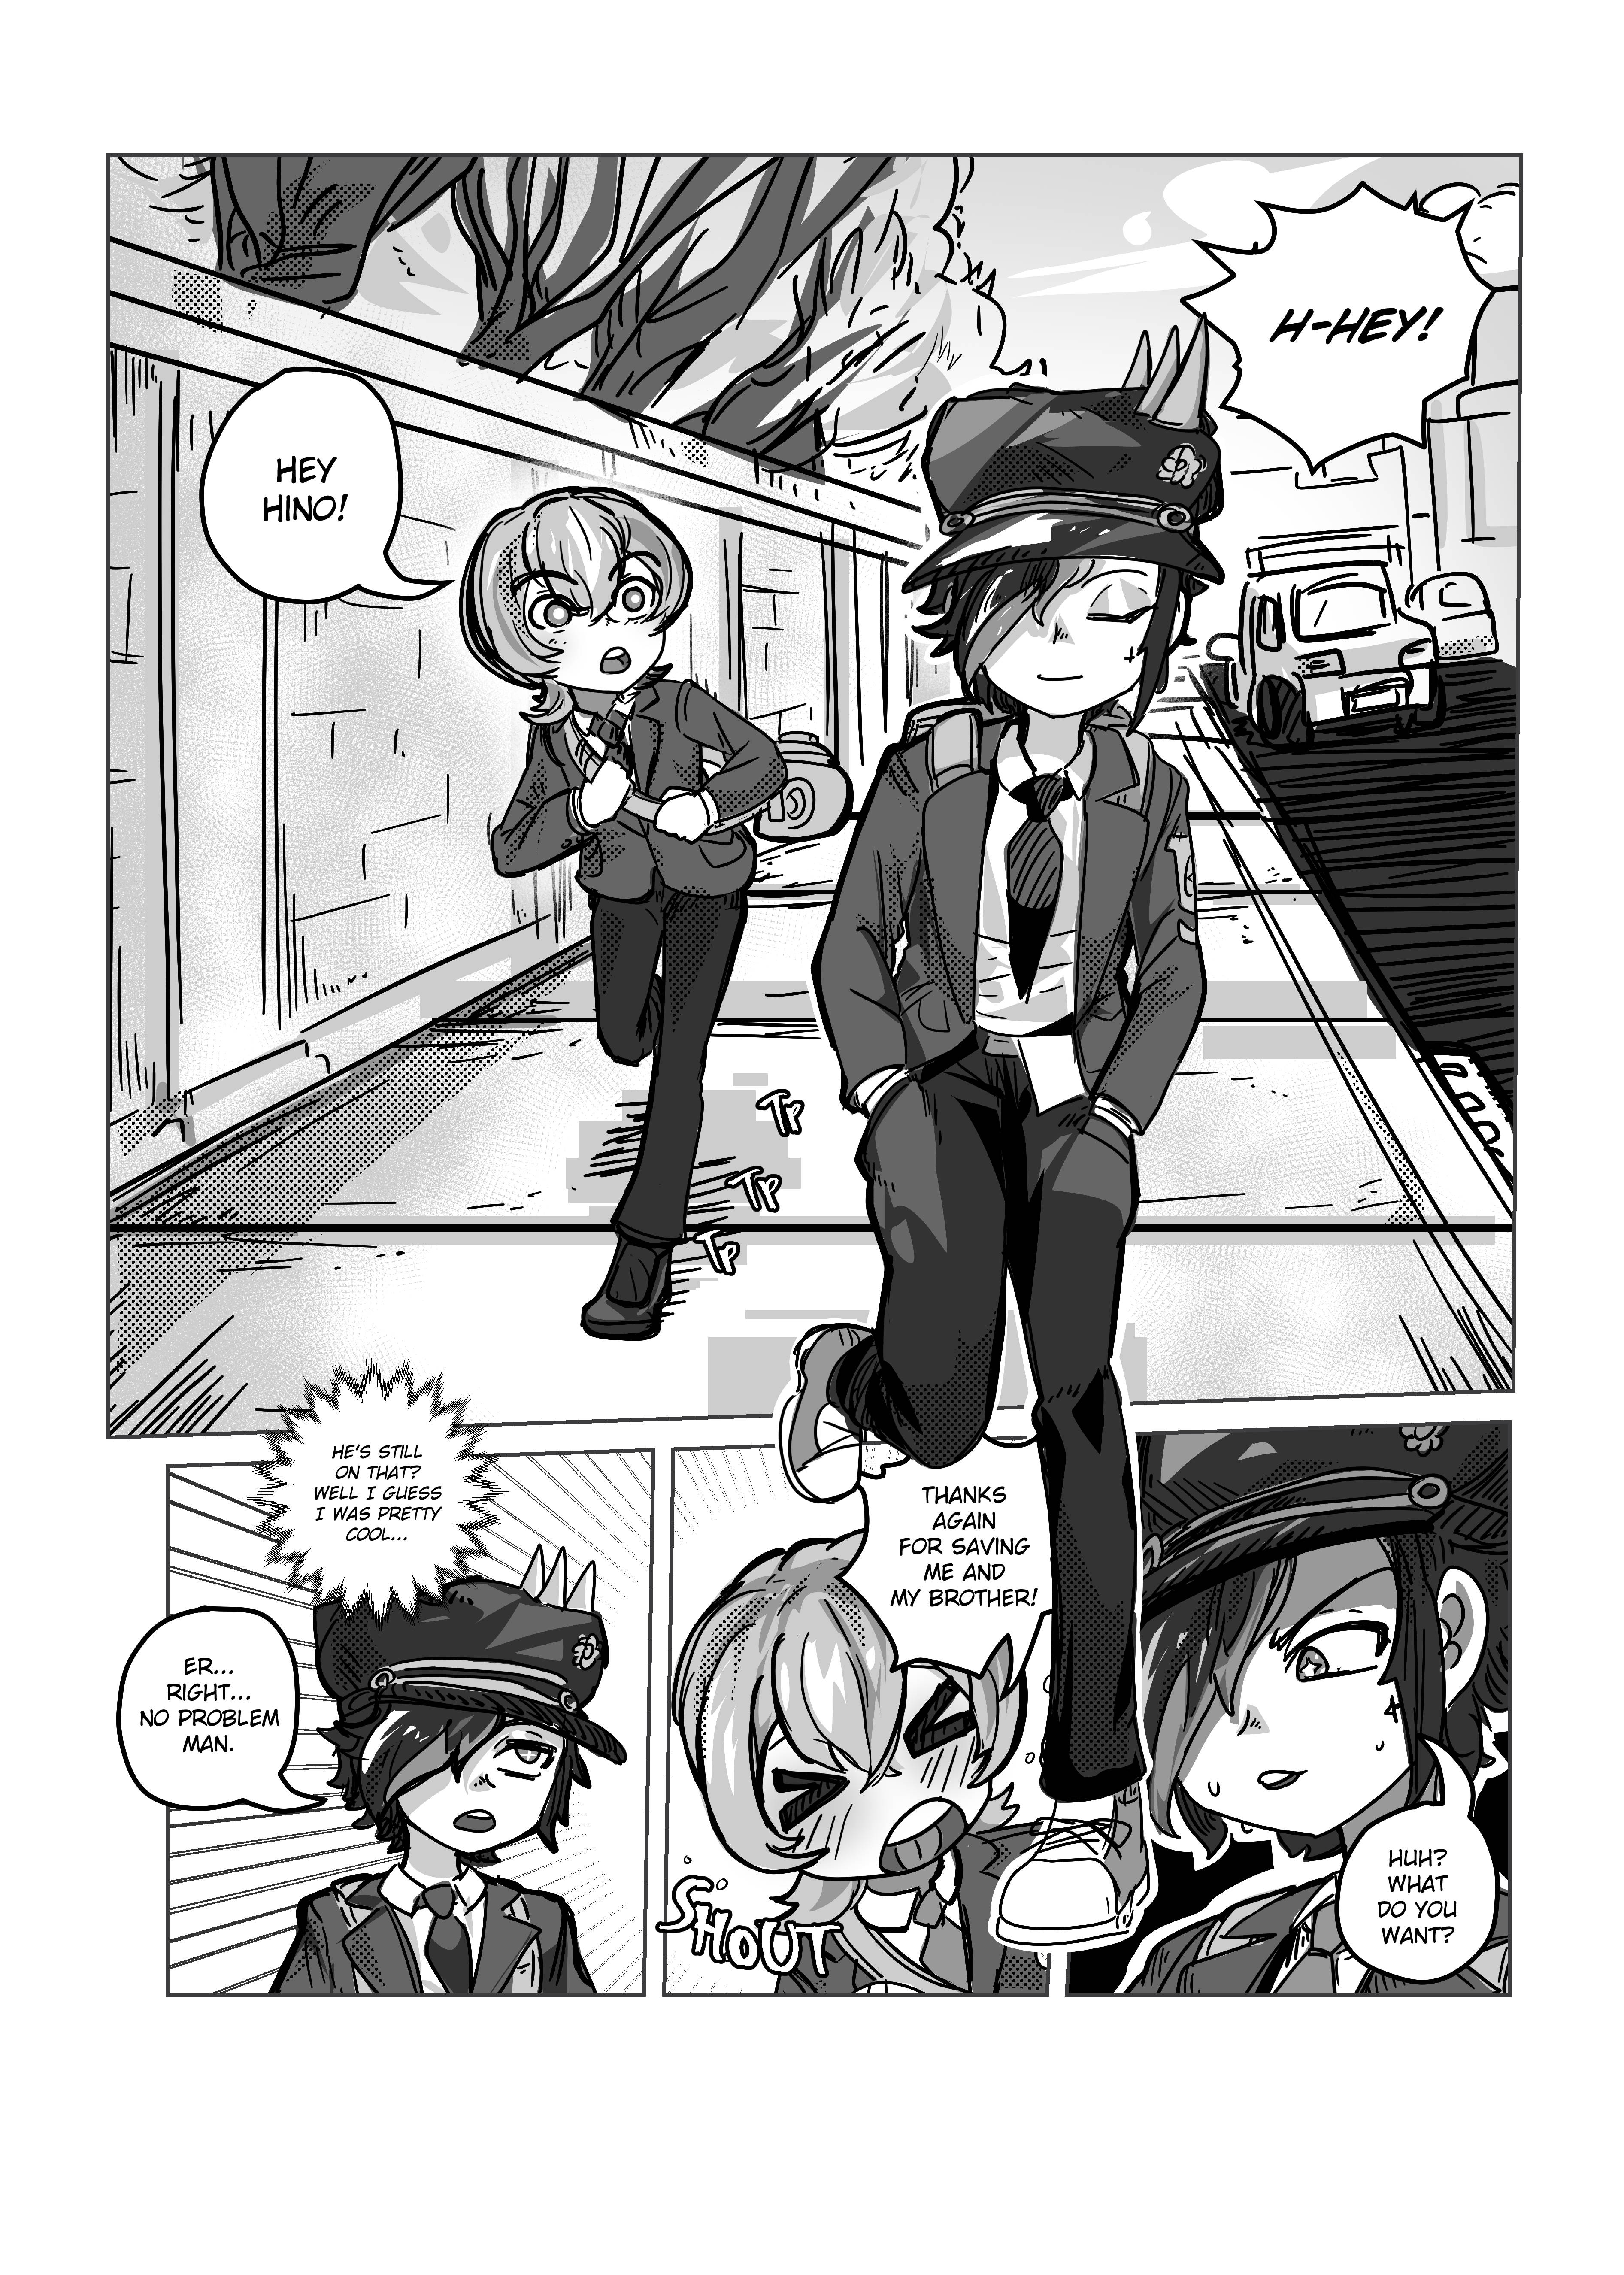 Scarlet Star Vol.1 Chapter 6: After School Activities - Picture 3